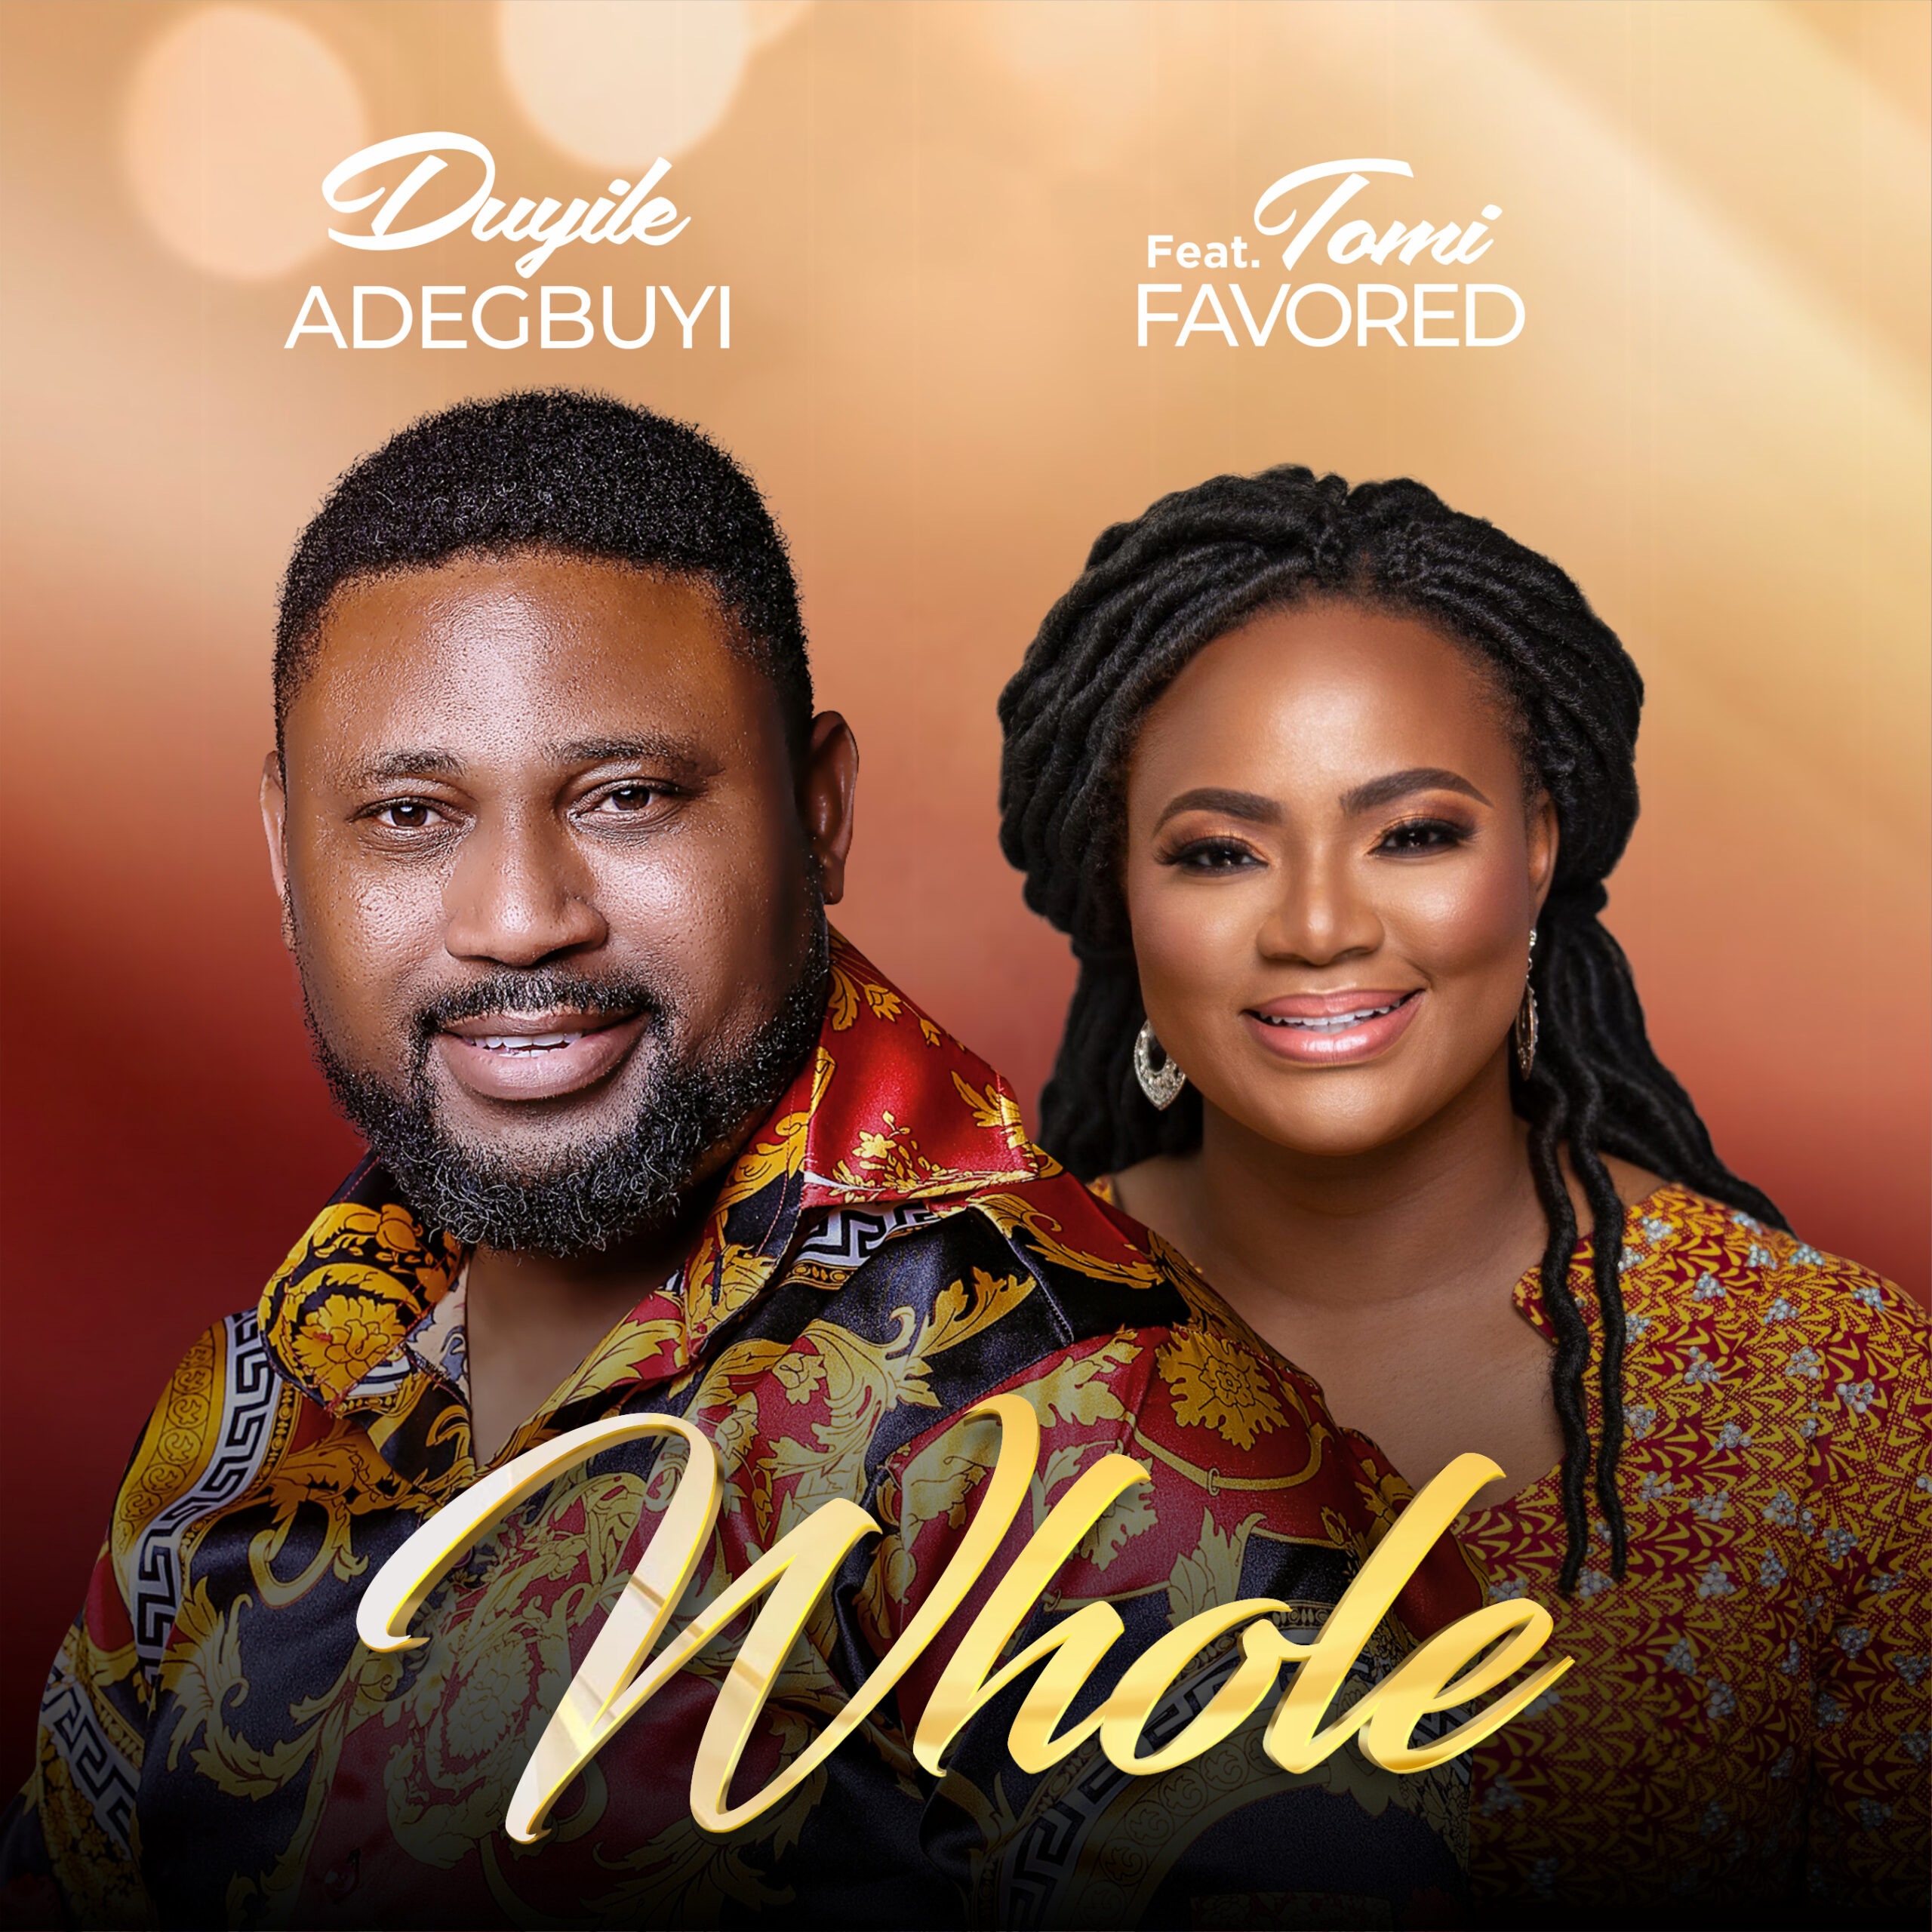 Whole by Duyile Adegbuyi Ft. Tomi Favored